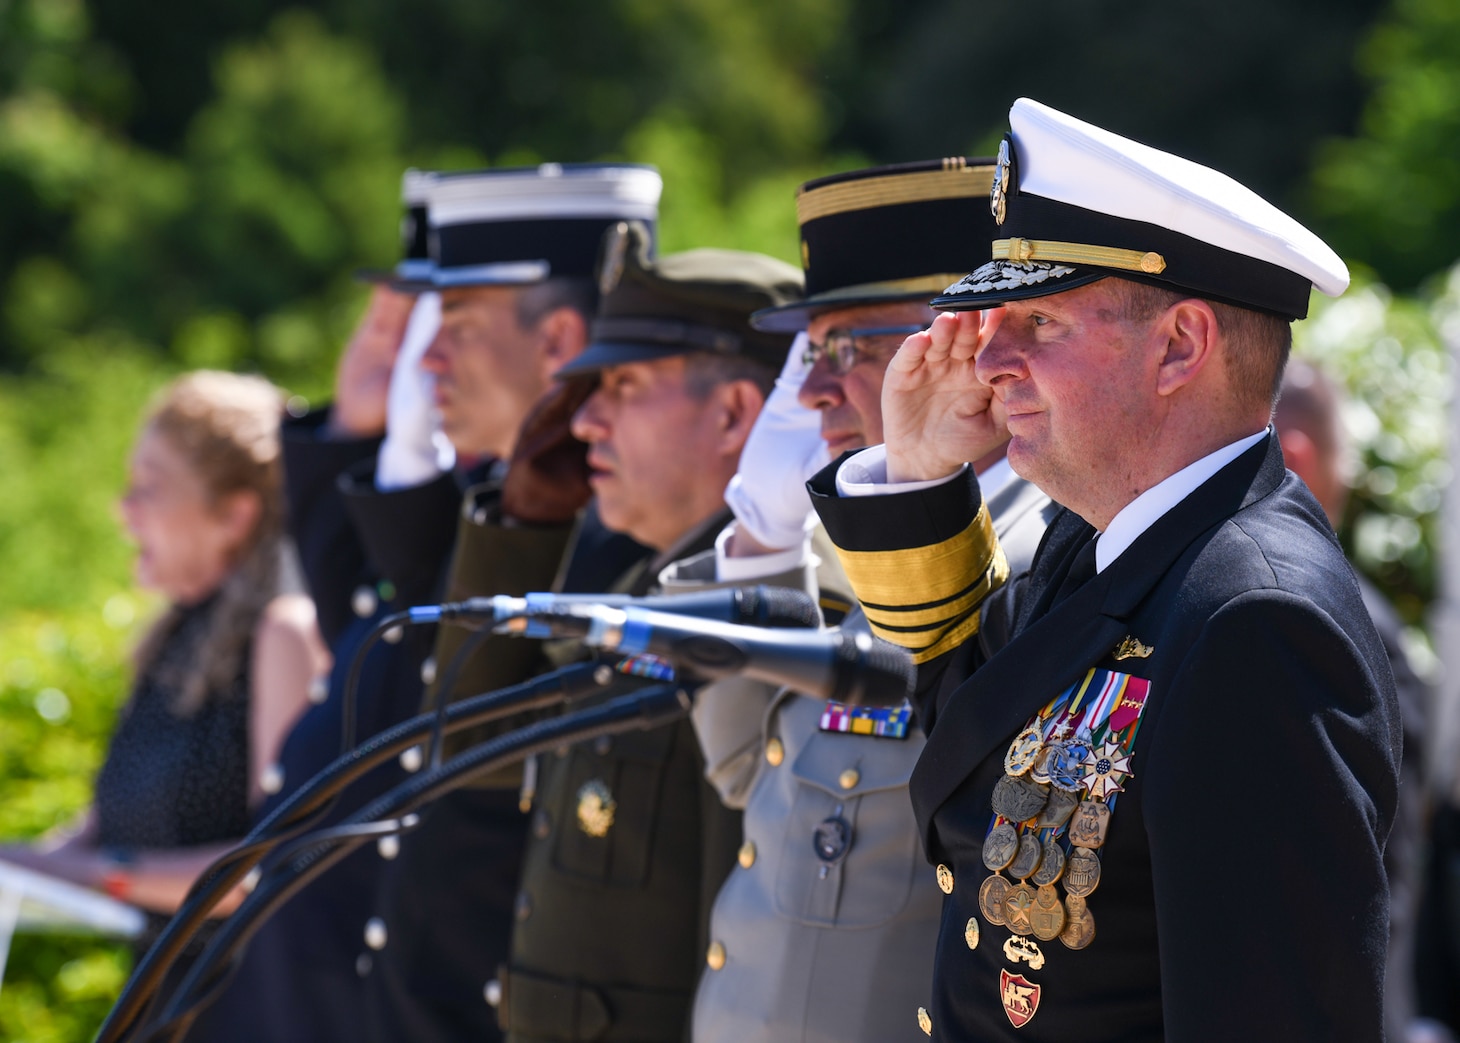 ROMAGNE-SOUS-MONTFAUCON, France (May 28, 2023) - U.S. Navy Adm. Stuart B. Munsch, commander for the U.S. Naval Forces Europe – Africa and Allied Joint Force Command Naples, along with other Admirals throughout the regions render salute during the national anthems (La Marseillaise & Star-Spangled Banner) sung by Mrs. Amy Malone at the Meuse-Argonne American Cemetery ceremony in Romagne-sous-Montfaucon, France, May 28, 2023. Admirals from the U.S. Naval Forces Europe-Africa, U.S. Sixth Fleet, and Navy Region Europe, Africa, Central traveled throughout Europe visiting American Battle Monuments Commission cemeteries to honor the lives and legacies of fallen U.S. and Allied service members who paid the ultimate price through servicing their countries. Headquarters in Naples, Italy, NAVEUR-NAVAF operates U.S. naval forces in the U.S. European Command and U.S. Africa Command area of responsibility. U.S. Sixth Fleet is permanently assigned to NAVEUR-NAVAF and employs maritime forces through the full spectrum of joint and naval operations.